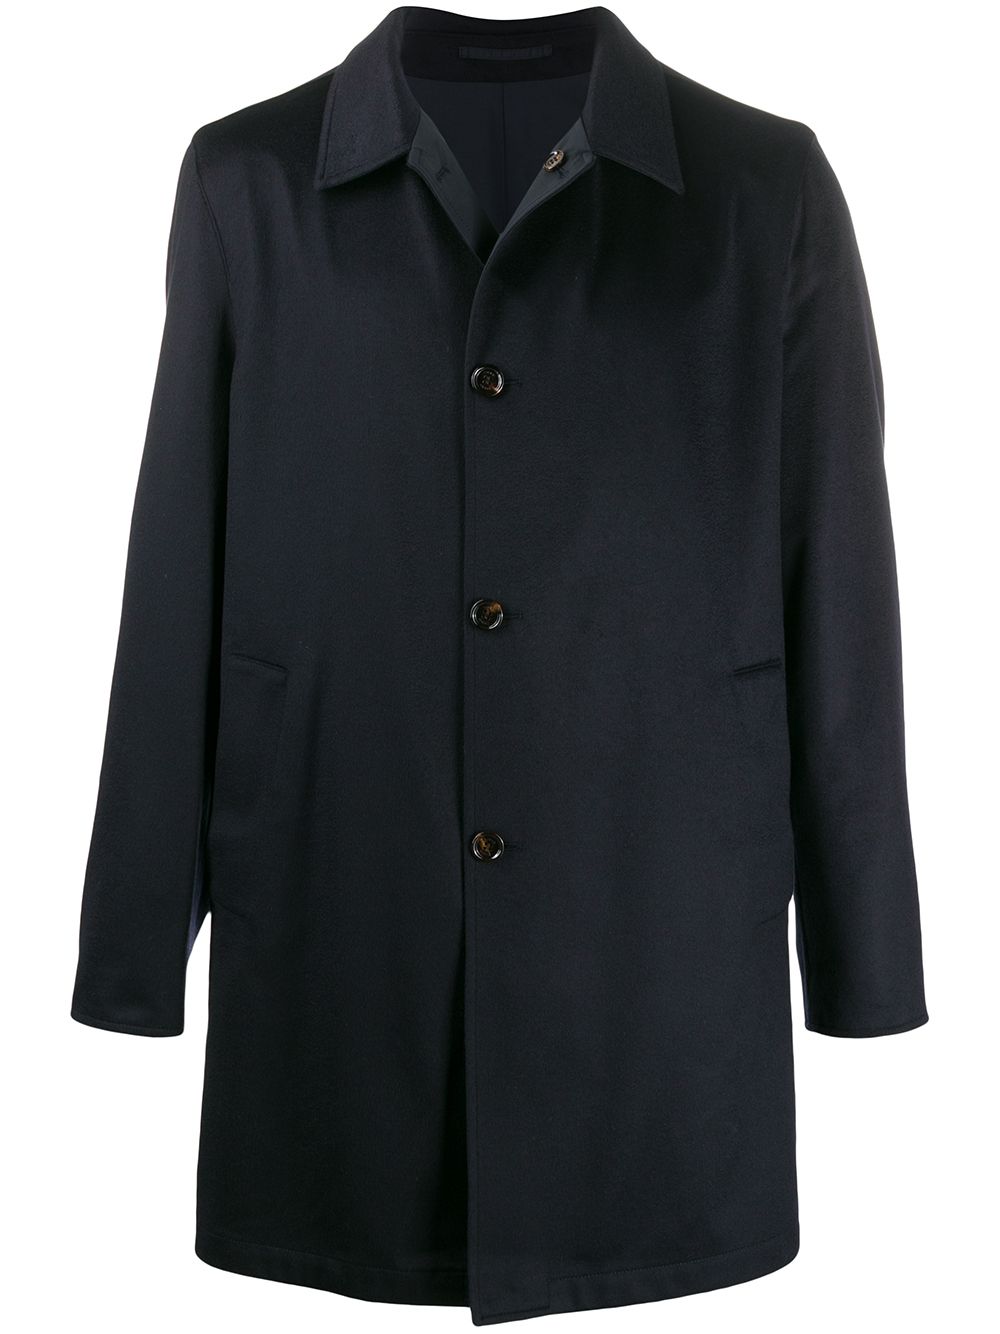 KIRED FINE KNIT BUTTONED COAT